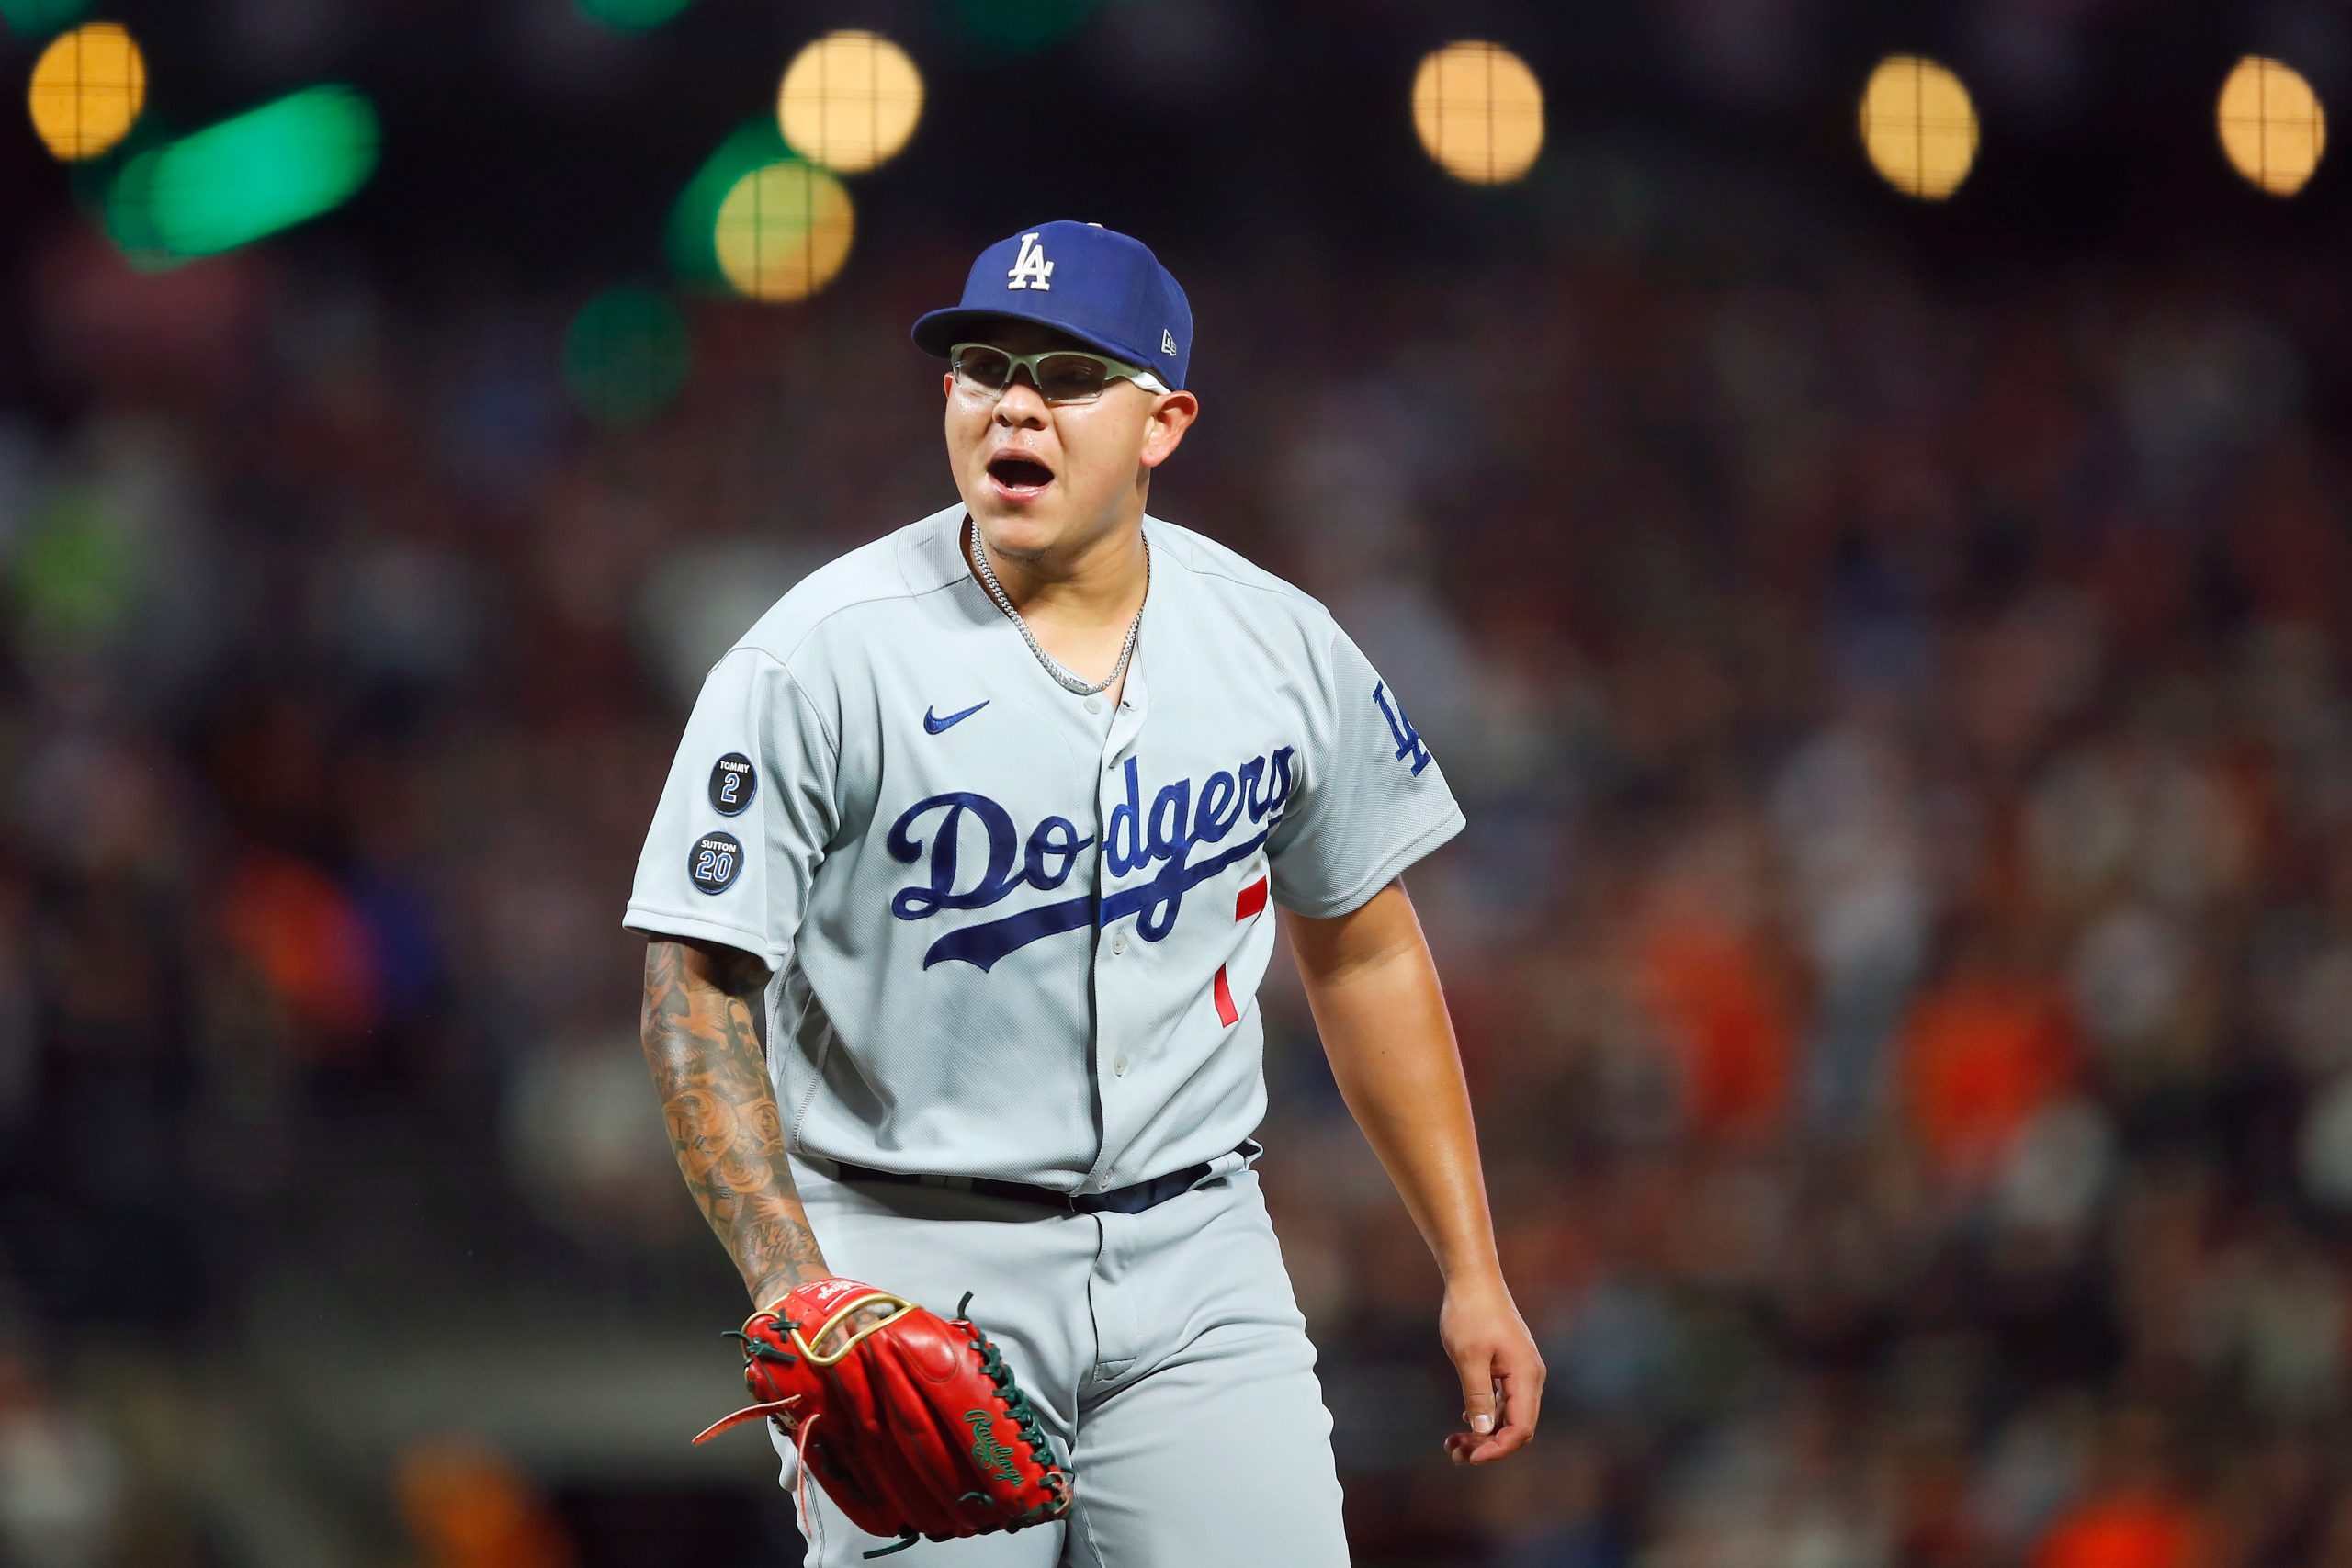 MLB: Urias hits, pitches Dodgers past Giants to even NLDS series